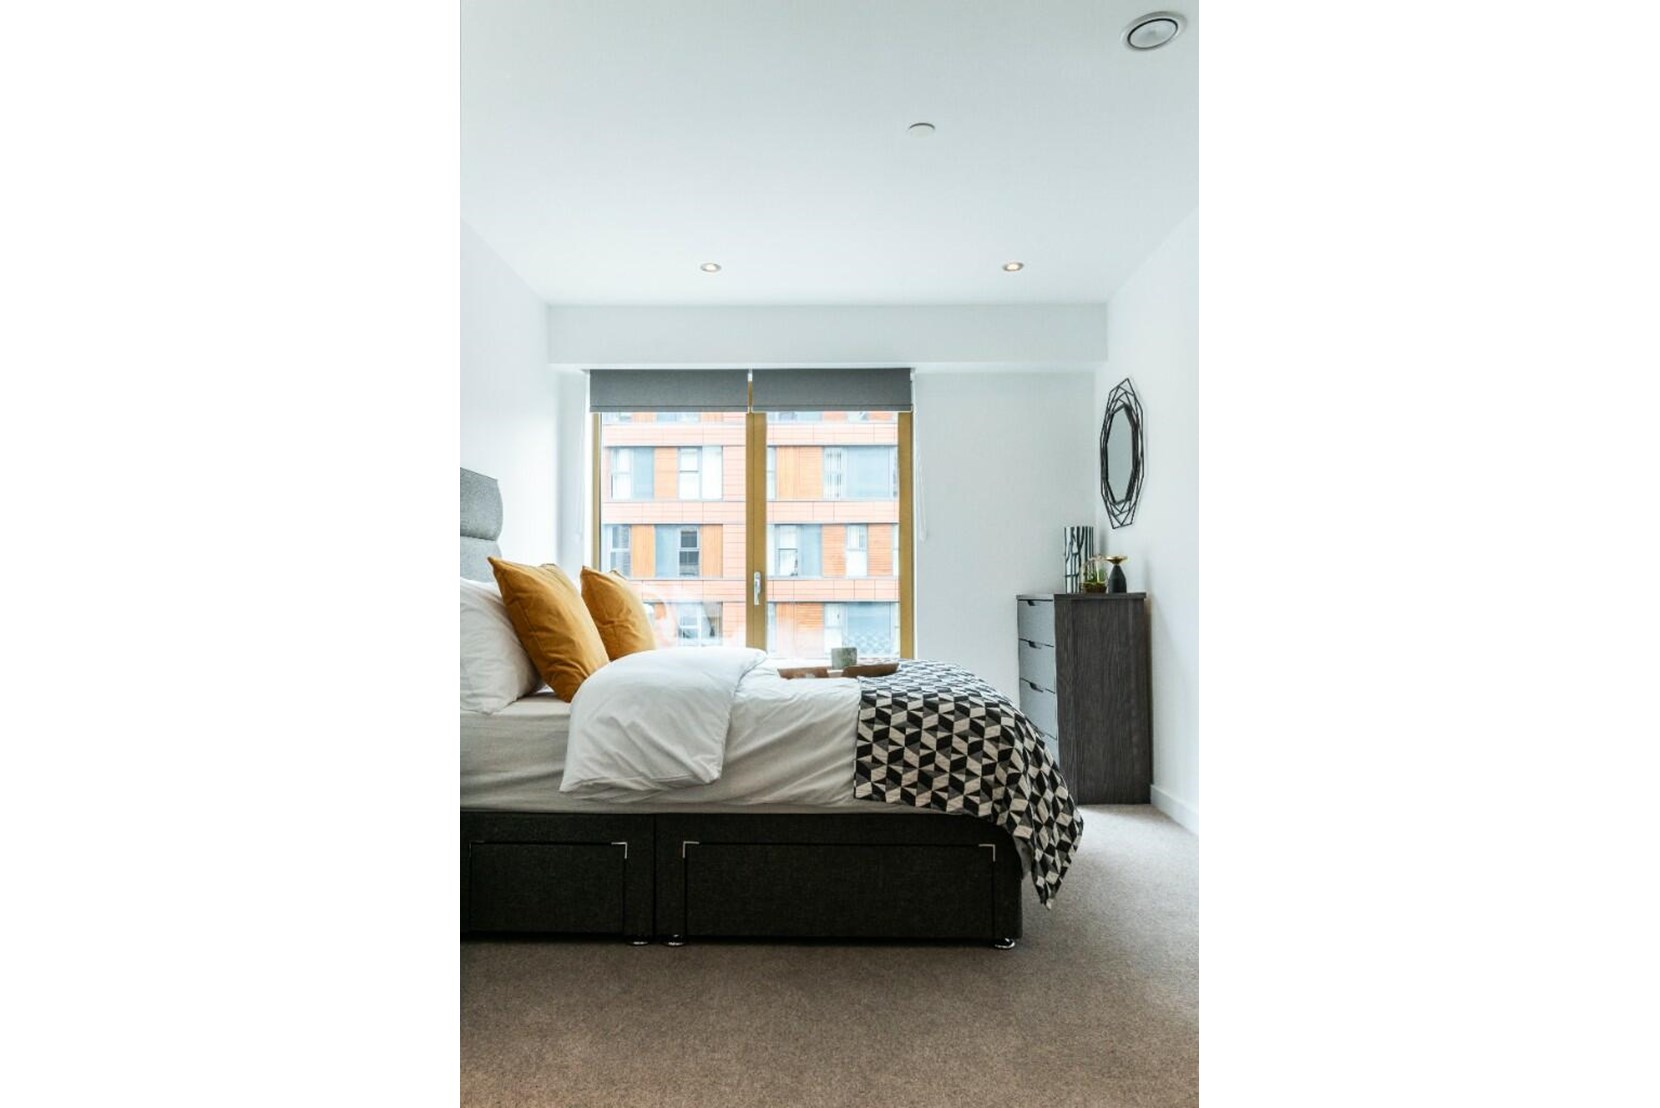 Apartments to Rent by Savills at The Astley, Manchester, M1, living area